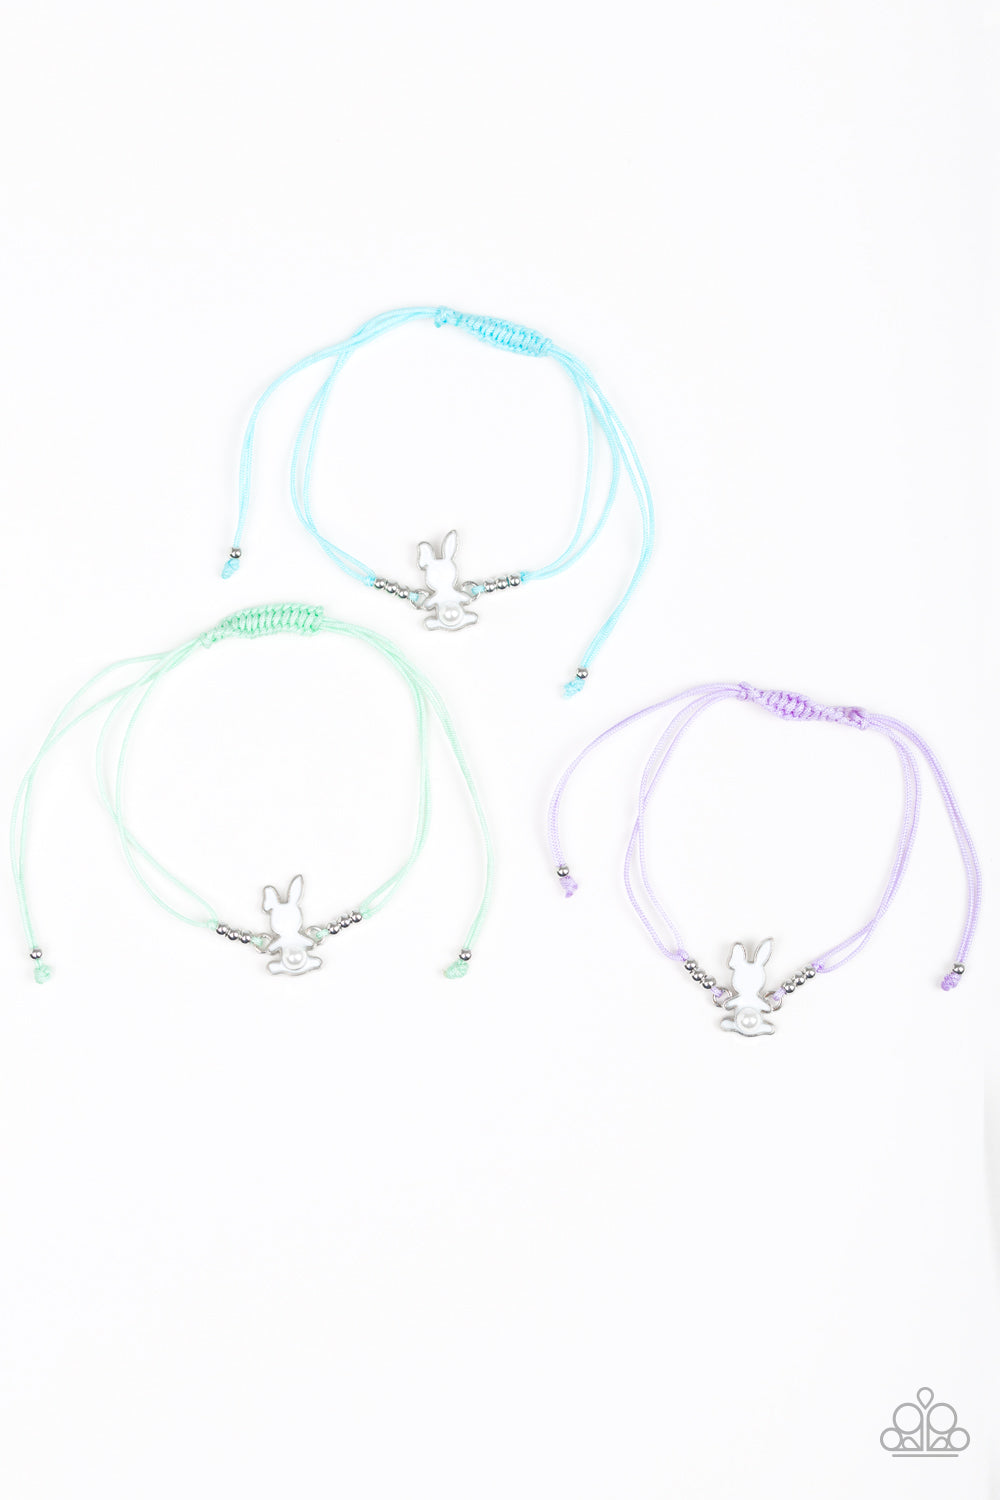 Starlet Shimmer Bunny- String Pull-Apart Bracelet Assorted colors - Susan's Jewelry Shop